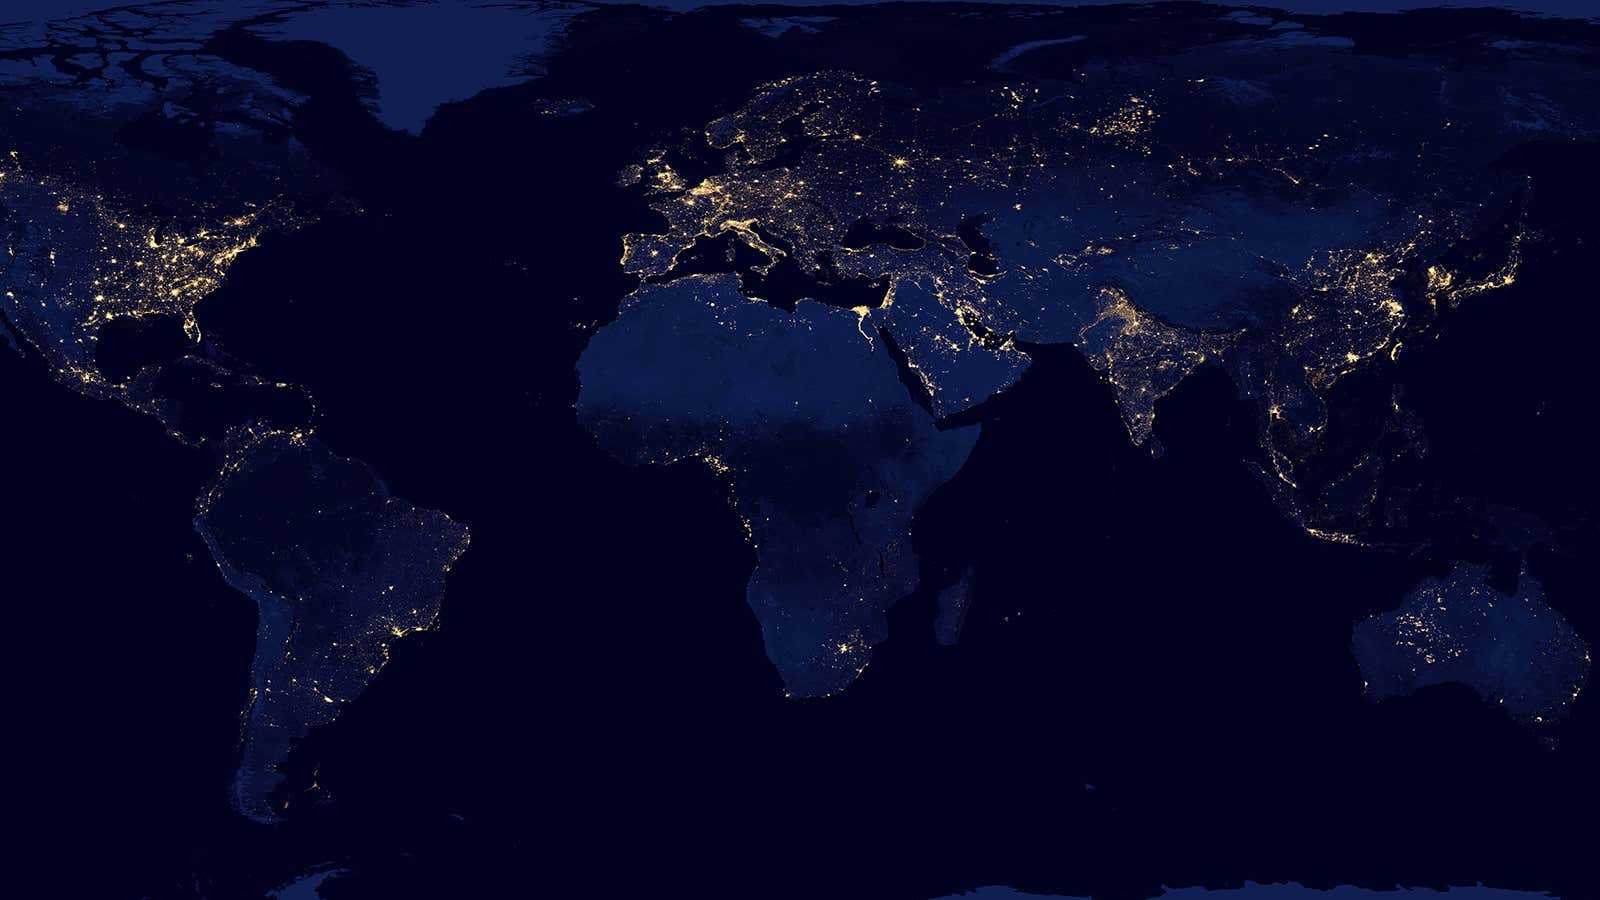 Light from the sub-Saharan grid is notably scarce.